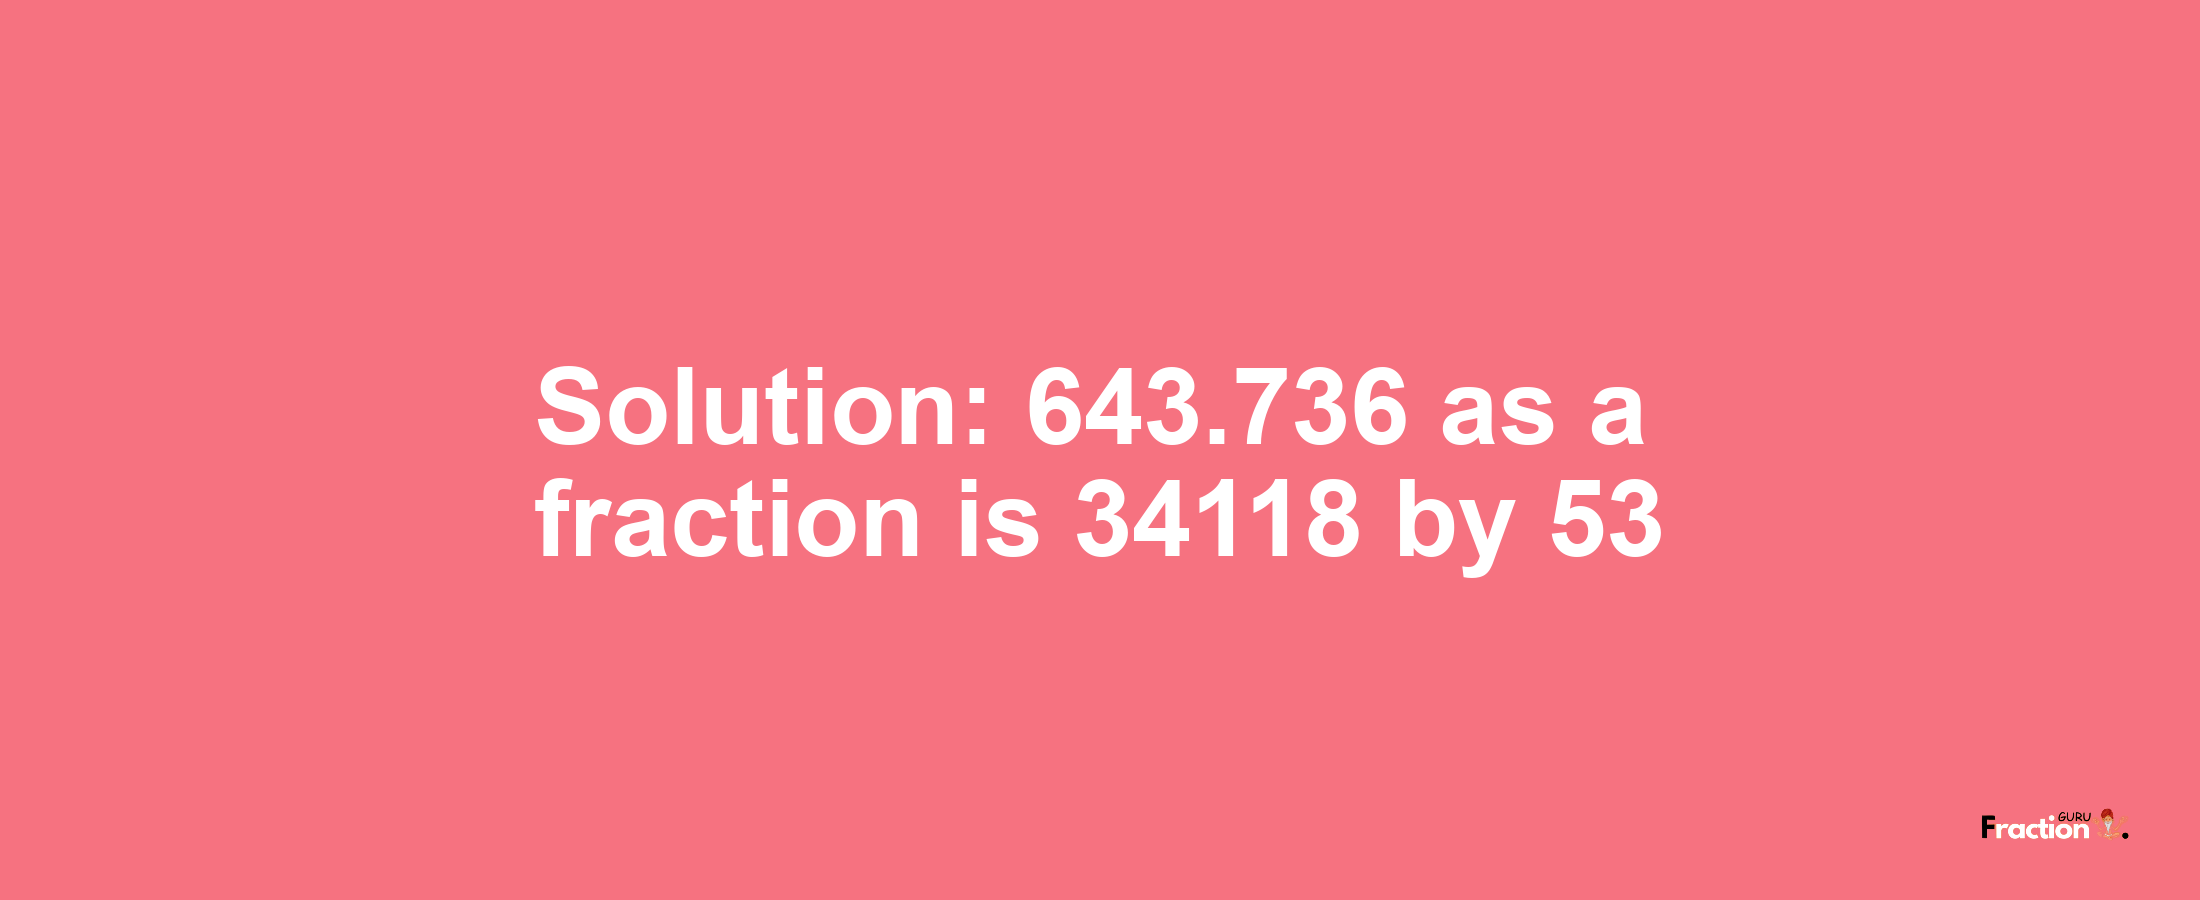 Solution:643.736 as a fraction is 34118/53